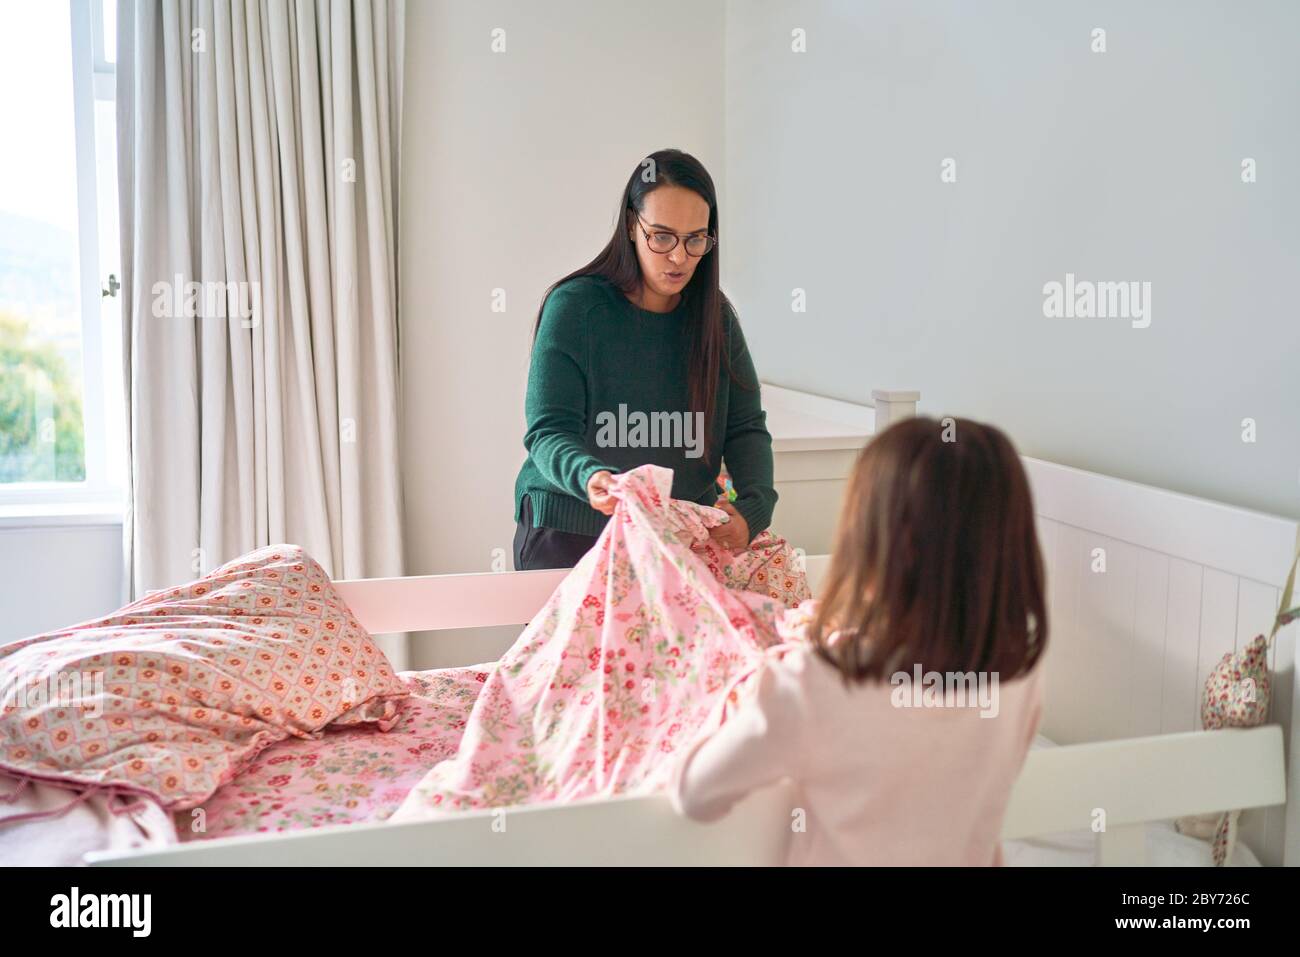 Mother helping daughter make bed Stock Photo